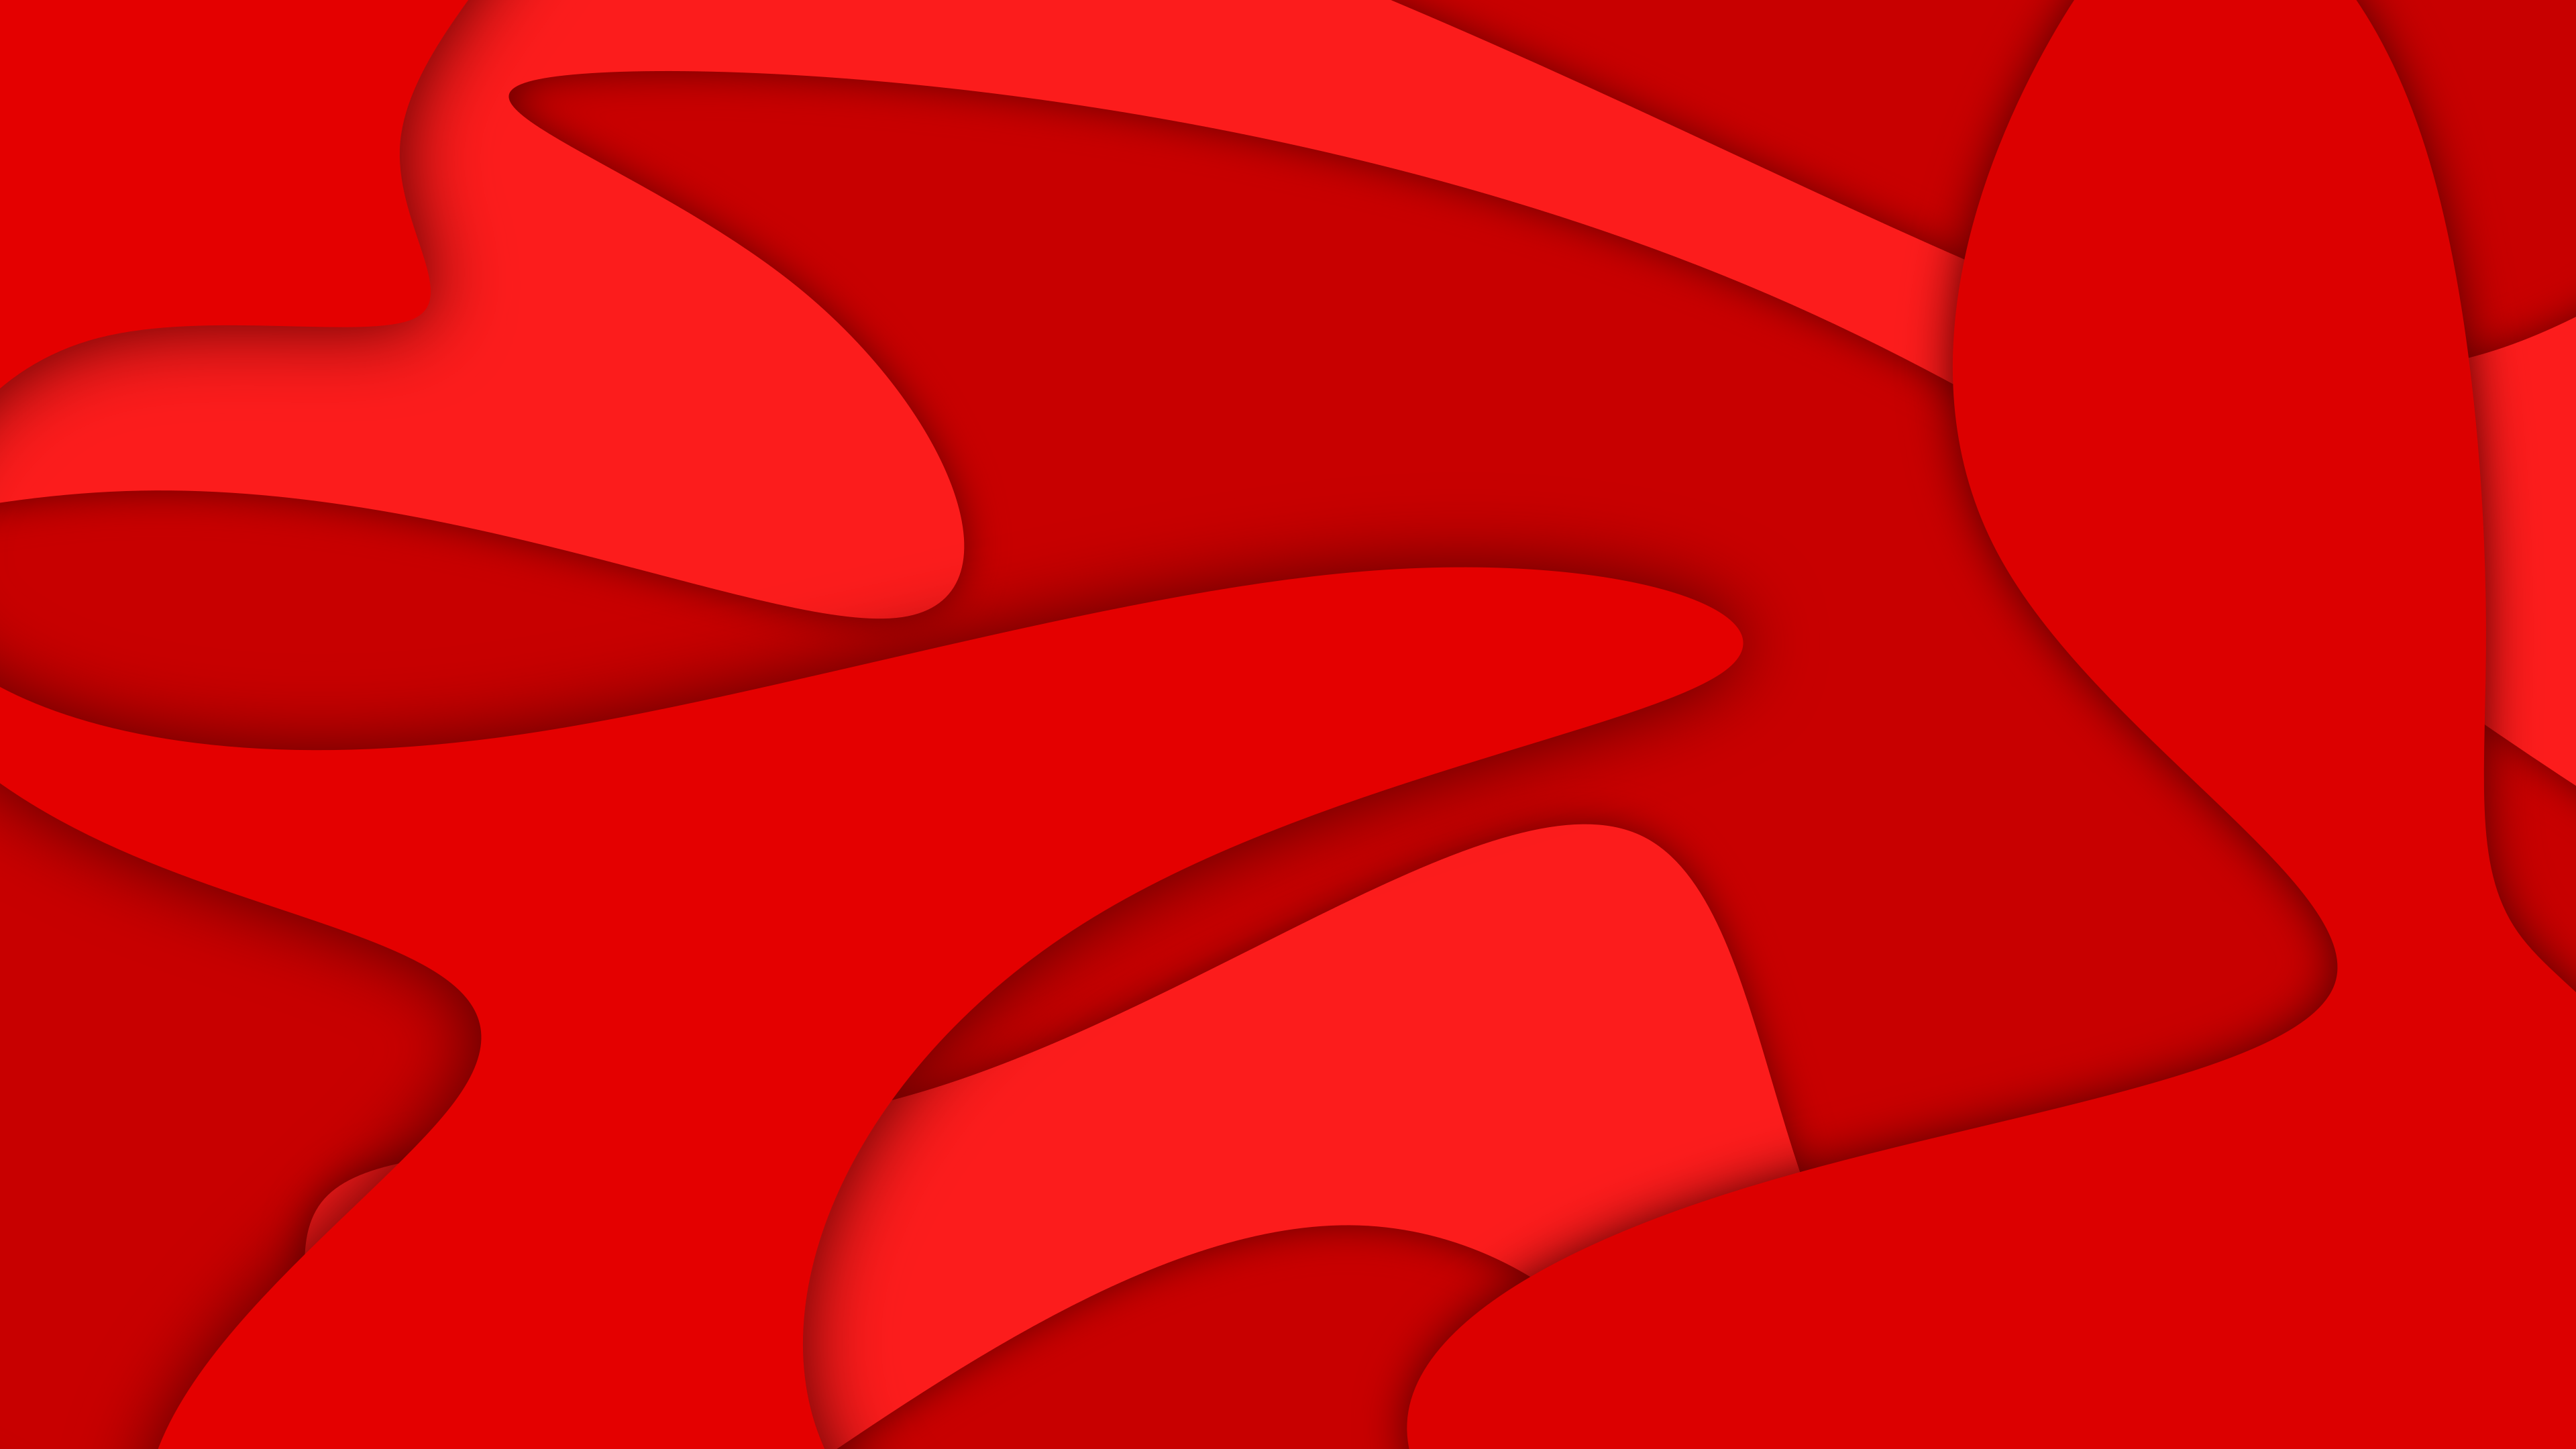 Red Abstract Swirls Shapes Red Background 3840x2160